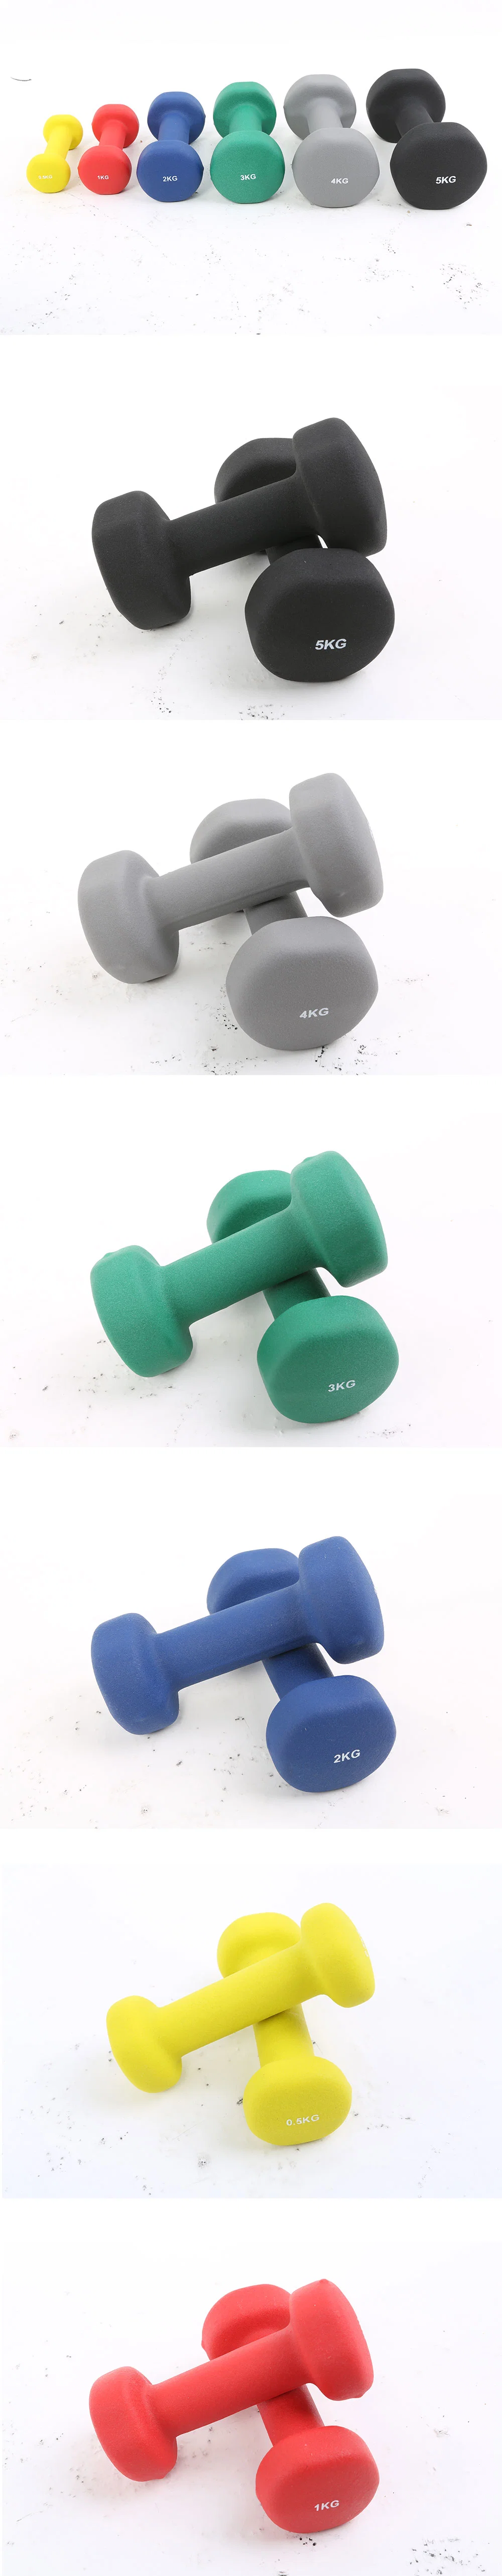 Neoprene Dumbbell Hand Weights, Anti-Slip, Anti-Roll, Hex Shape Colorful